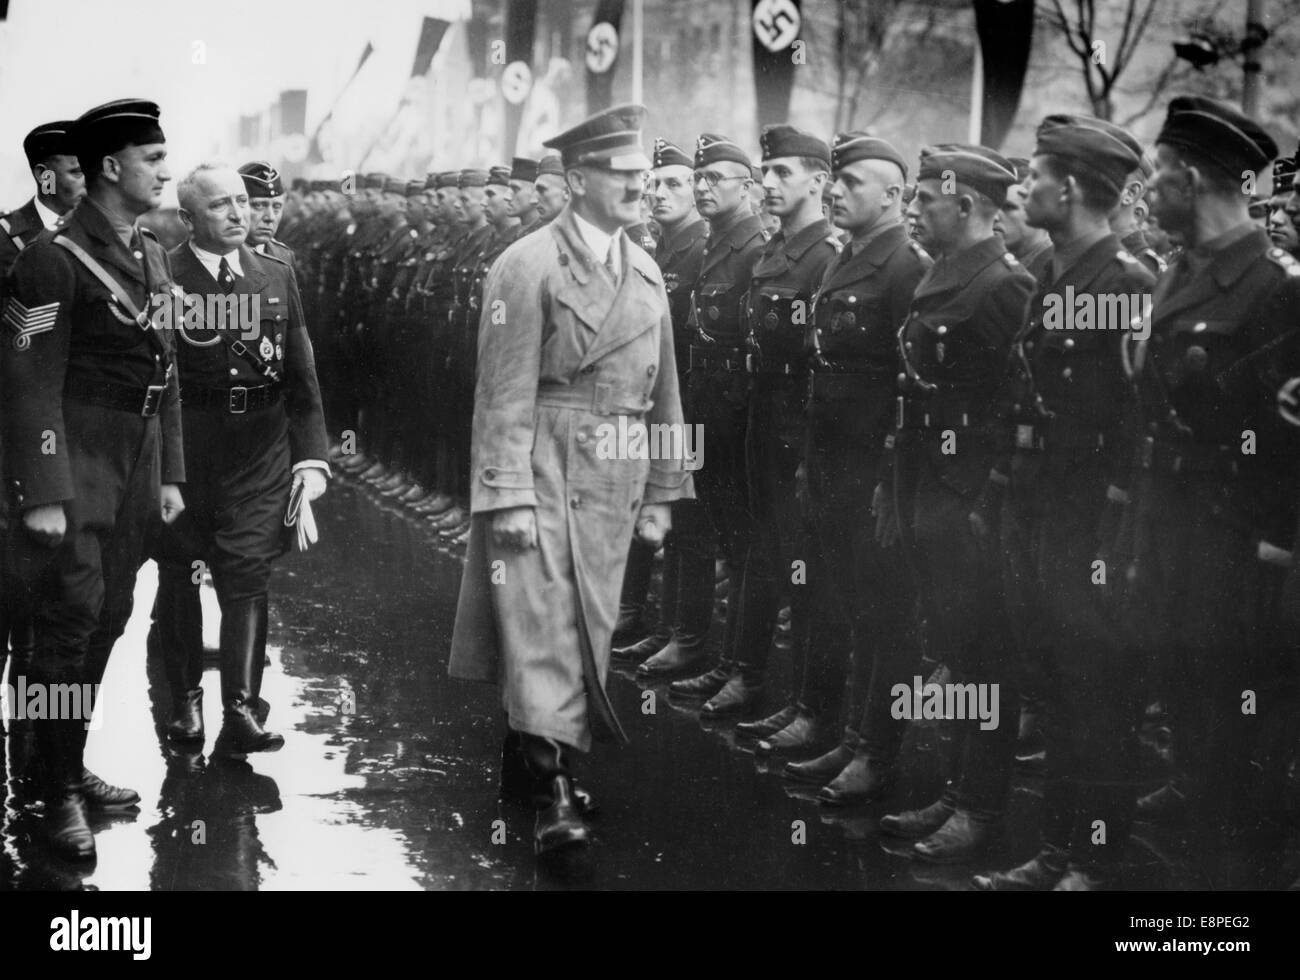 Nuremberg Rally 1937 in Nuremberg, Germany - Adolf Hitler reviews a line-up of members of the German Labour Front (DAF) at Deutscher Hof in Nuremberg. 2-L: head of the DAF, Robert Ley. (Flaws in quality due to the historic picture copy) Fotoarchiv für Zeitgeschichtee - NO WIRE SERVICE – Stock Photo